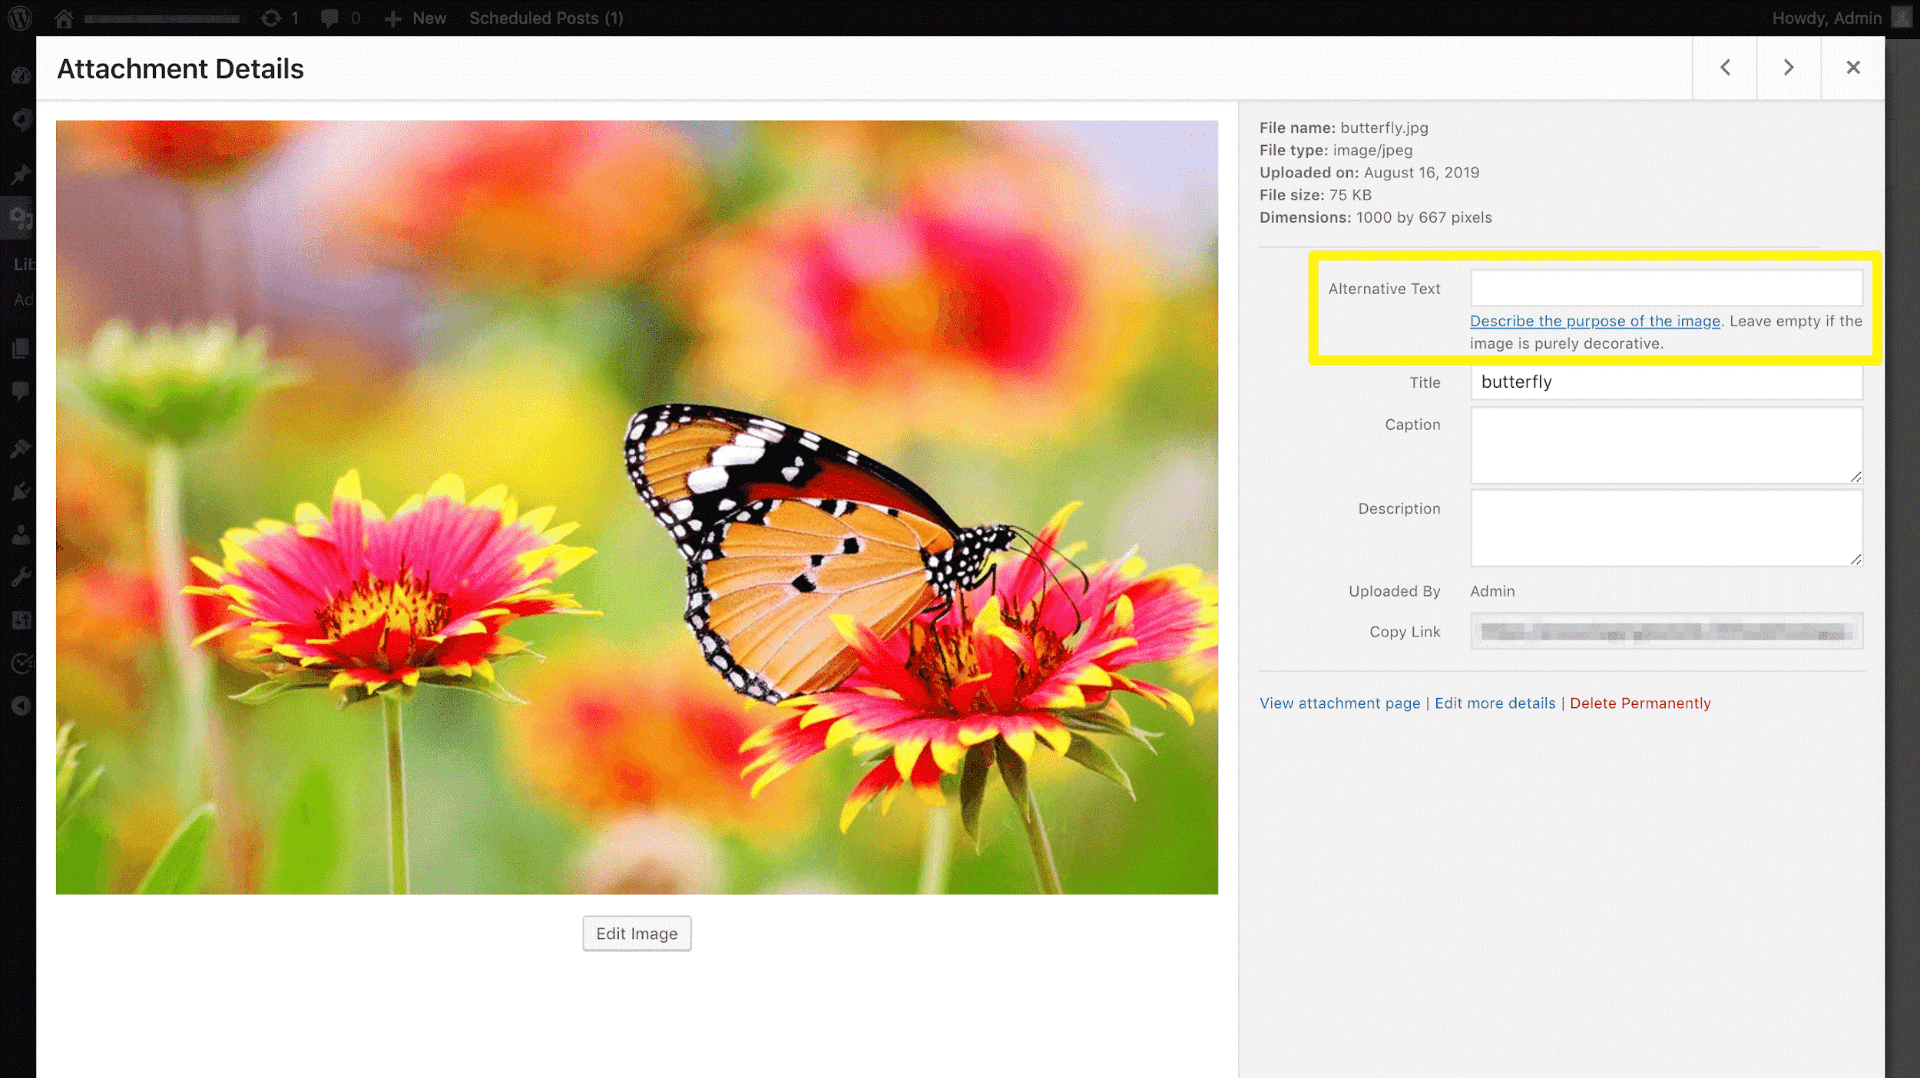 Enter the alt text information into the field on the right in your Media Library (screenshot)